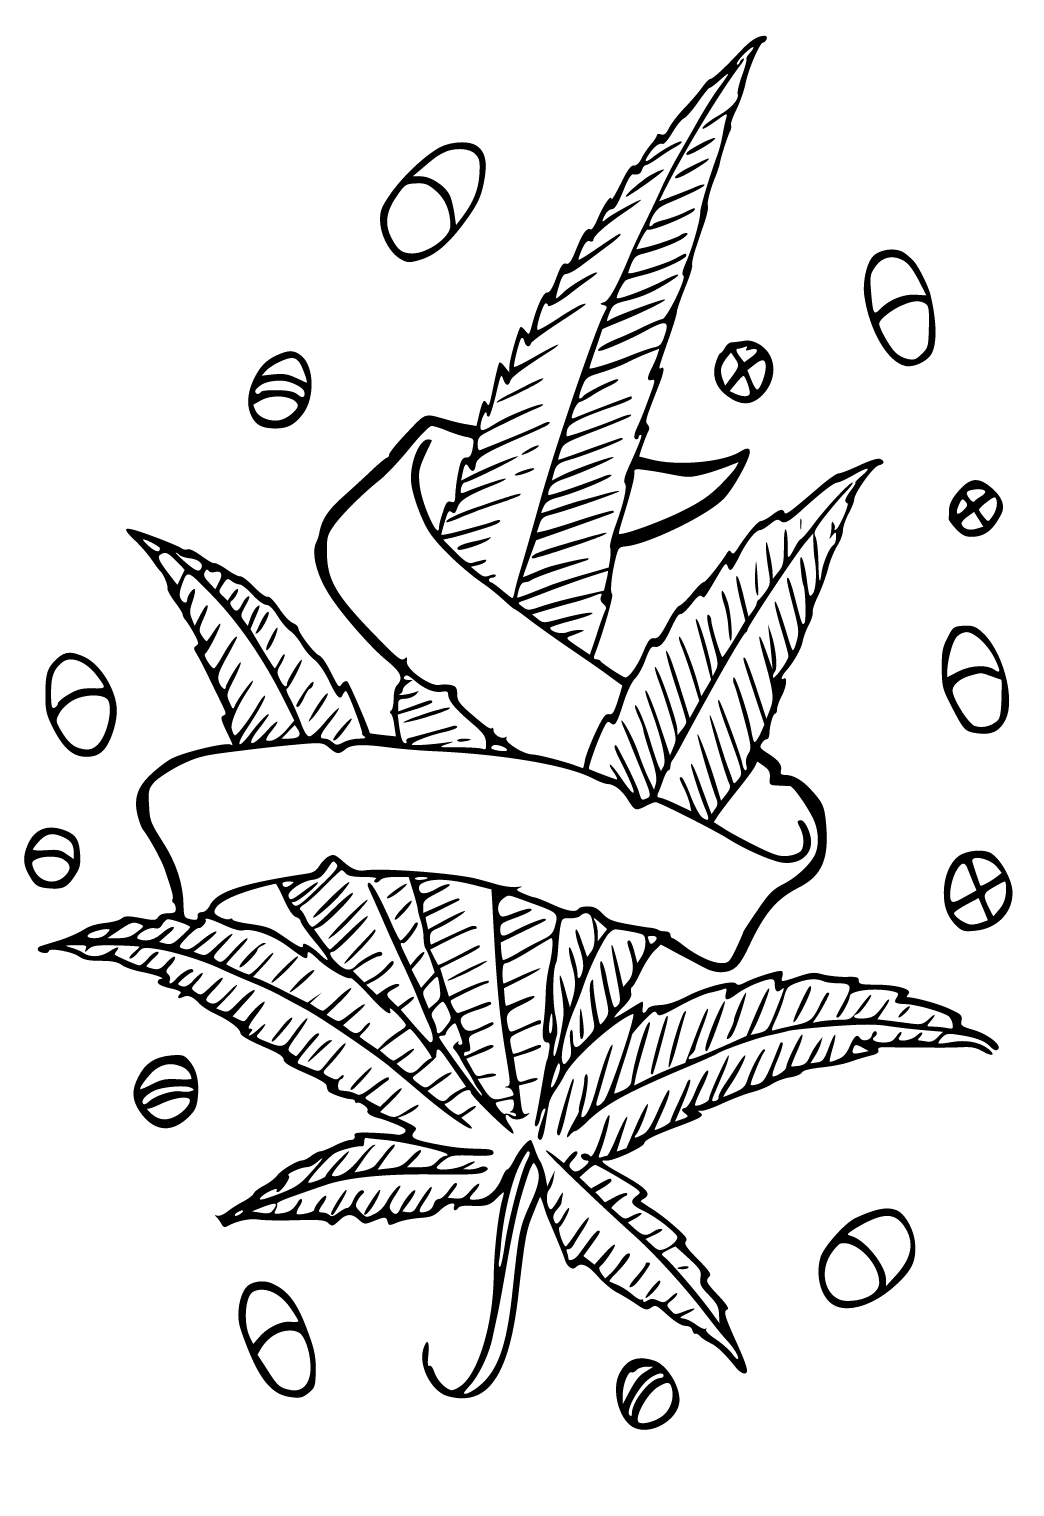 Free printable weed message coloring page for adults and kids